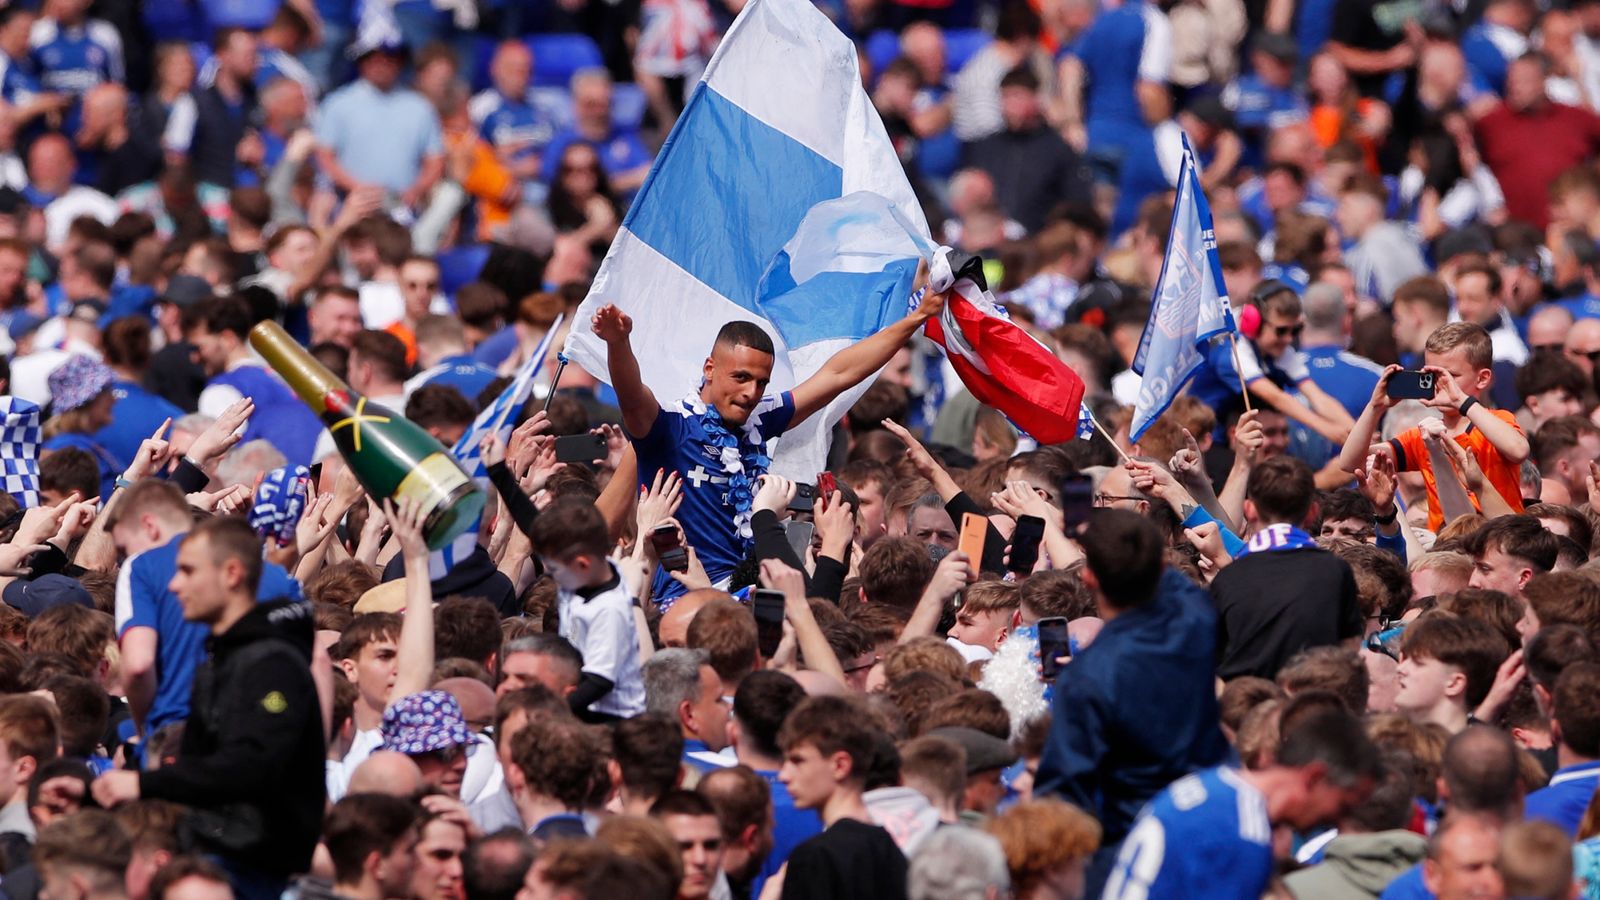 Ipswich Town promoted to the Premier League after 22 years away | UK News |  Sky News